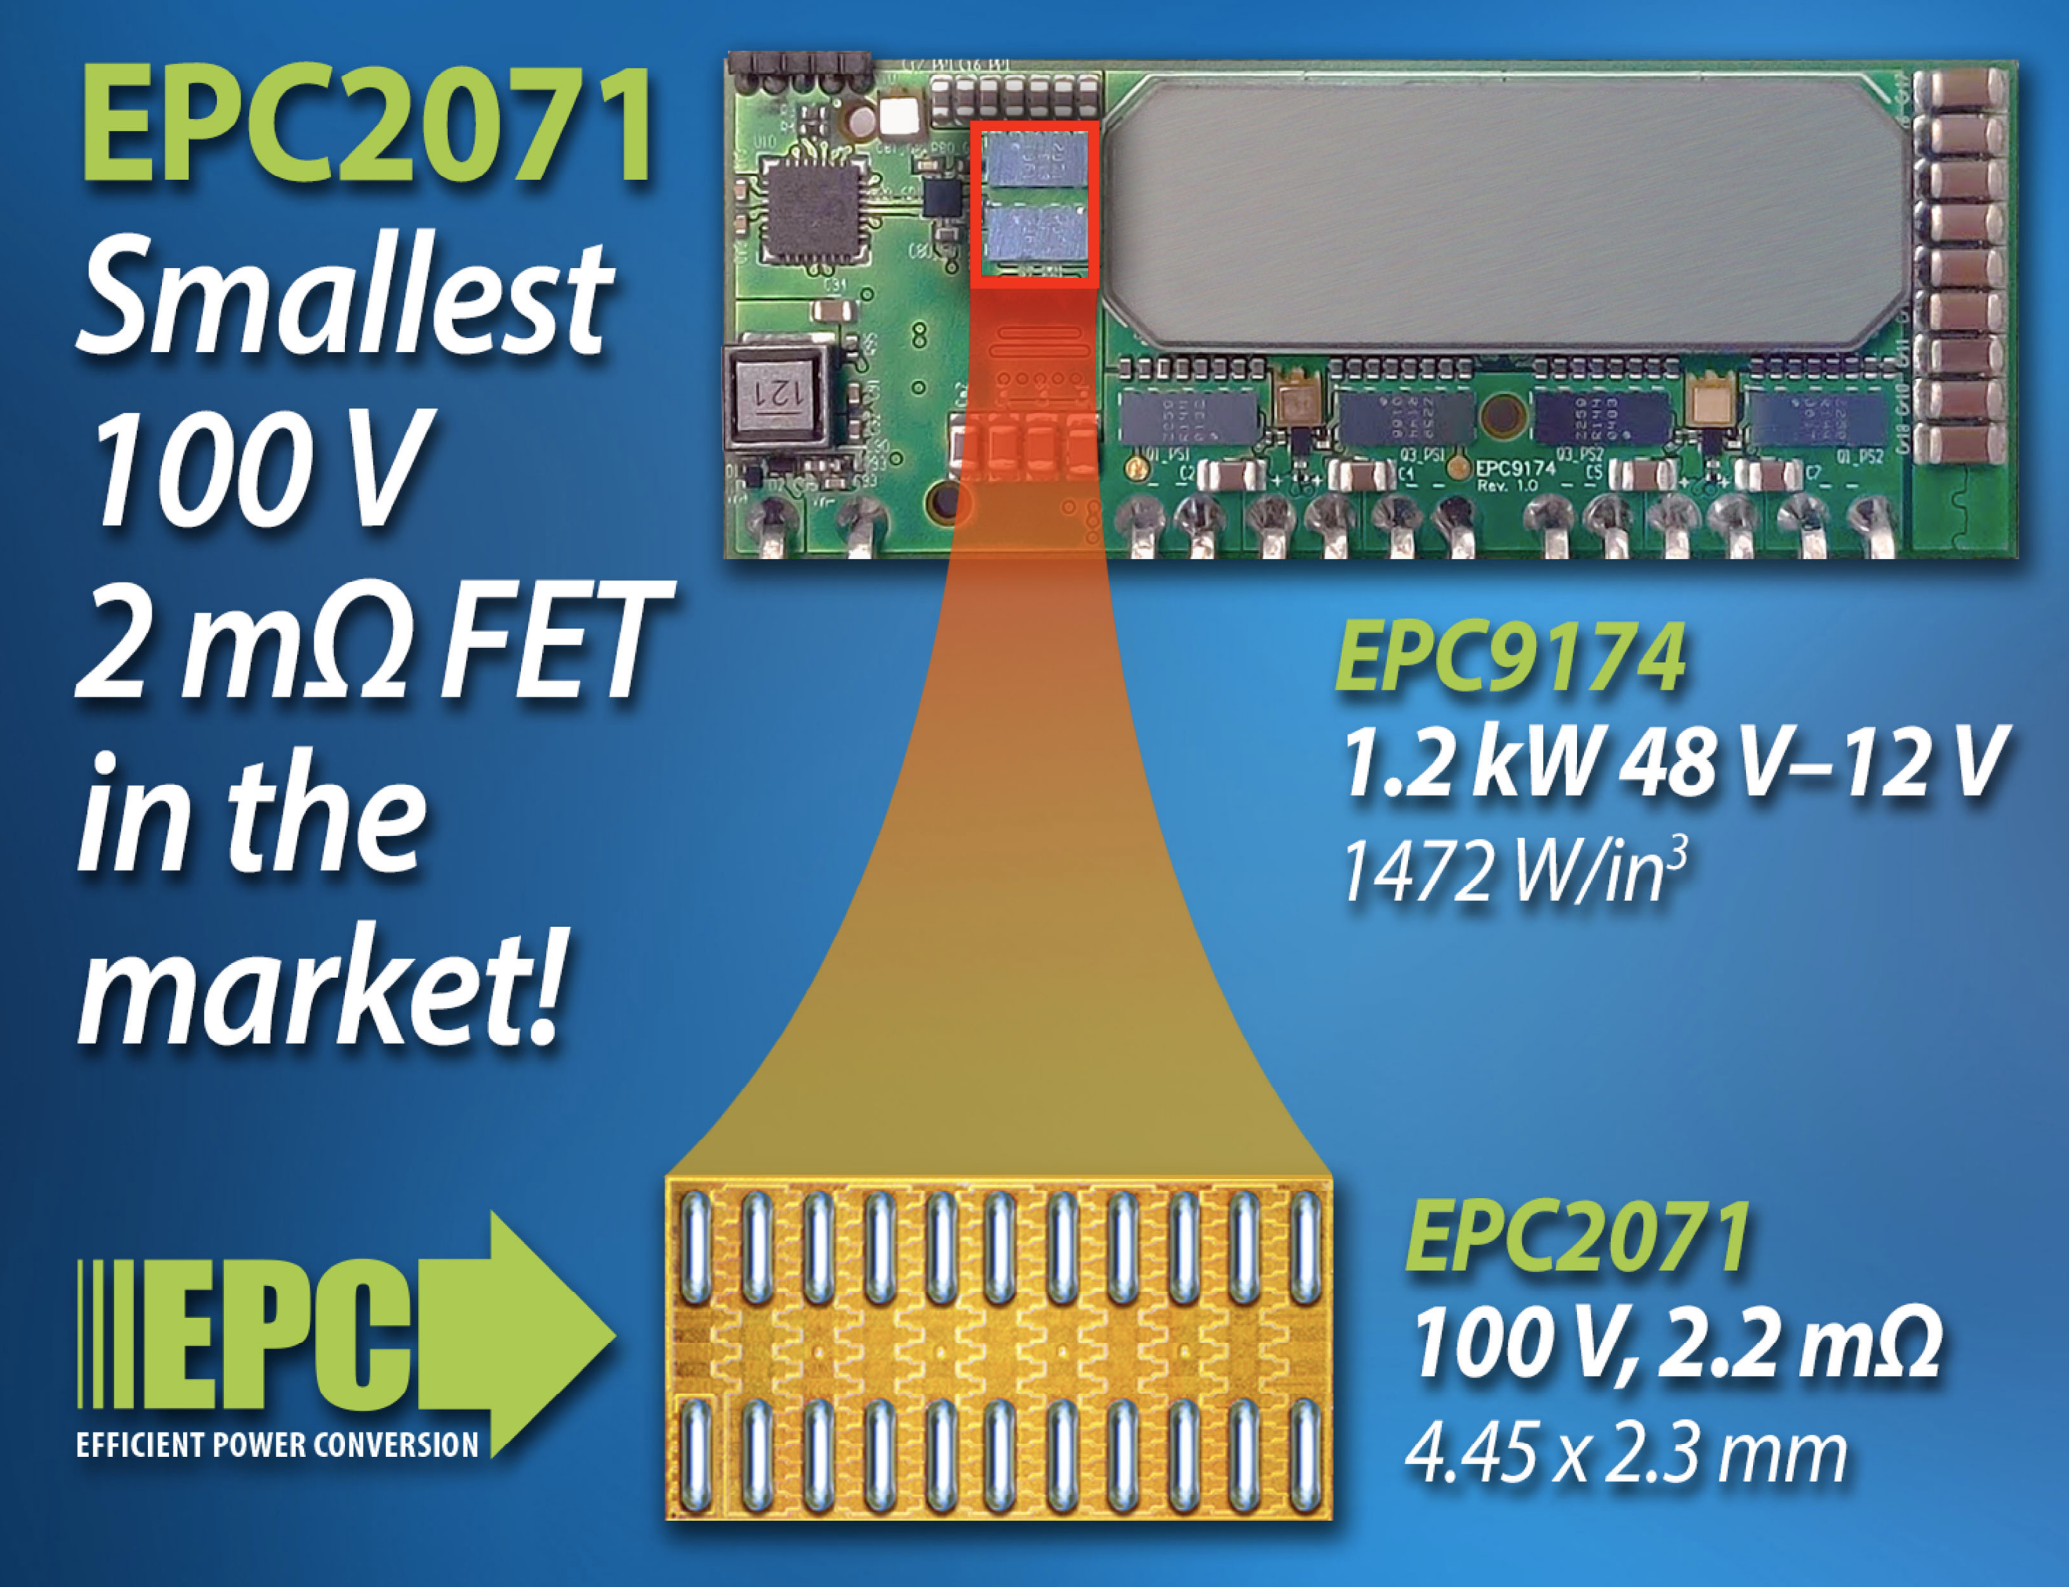 Smallest 100 V, 2 mΩ GaN FET in the World is Now Shipping from EPC